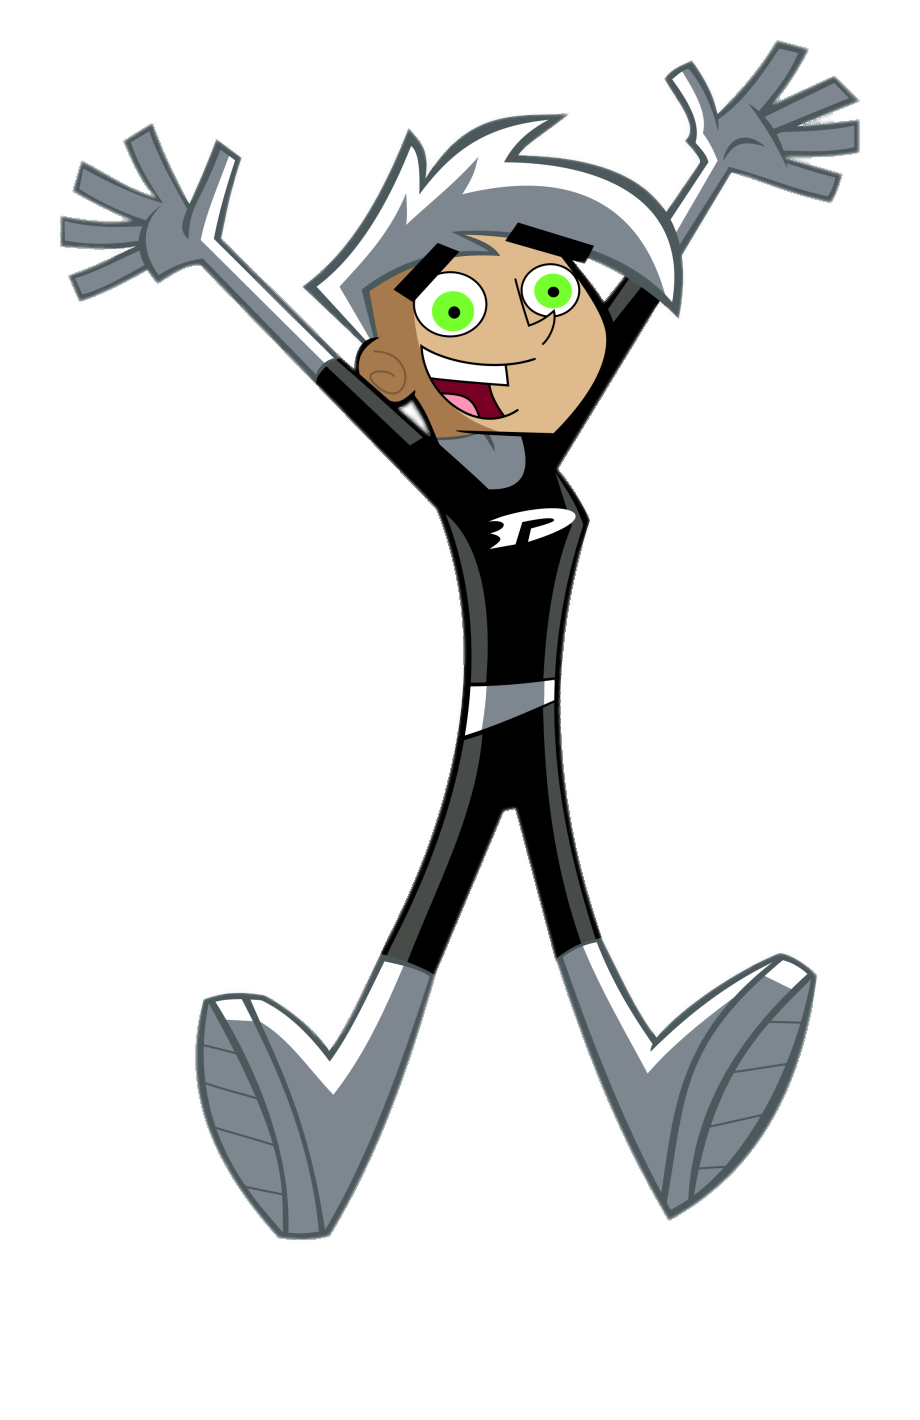 Check out this transparent Danny Phantom Hurray PNG image